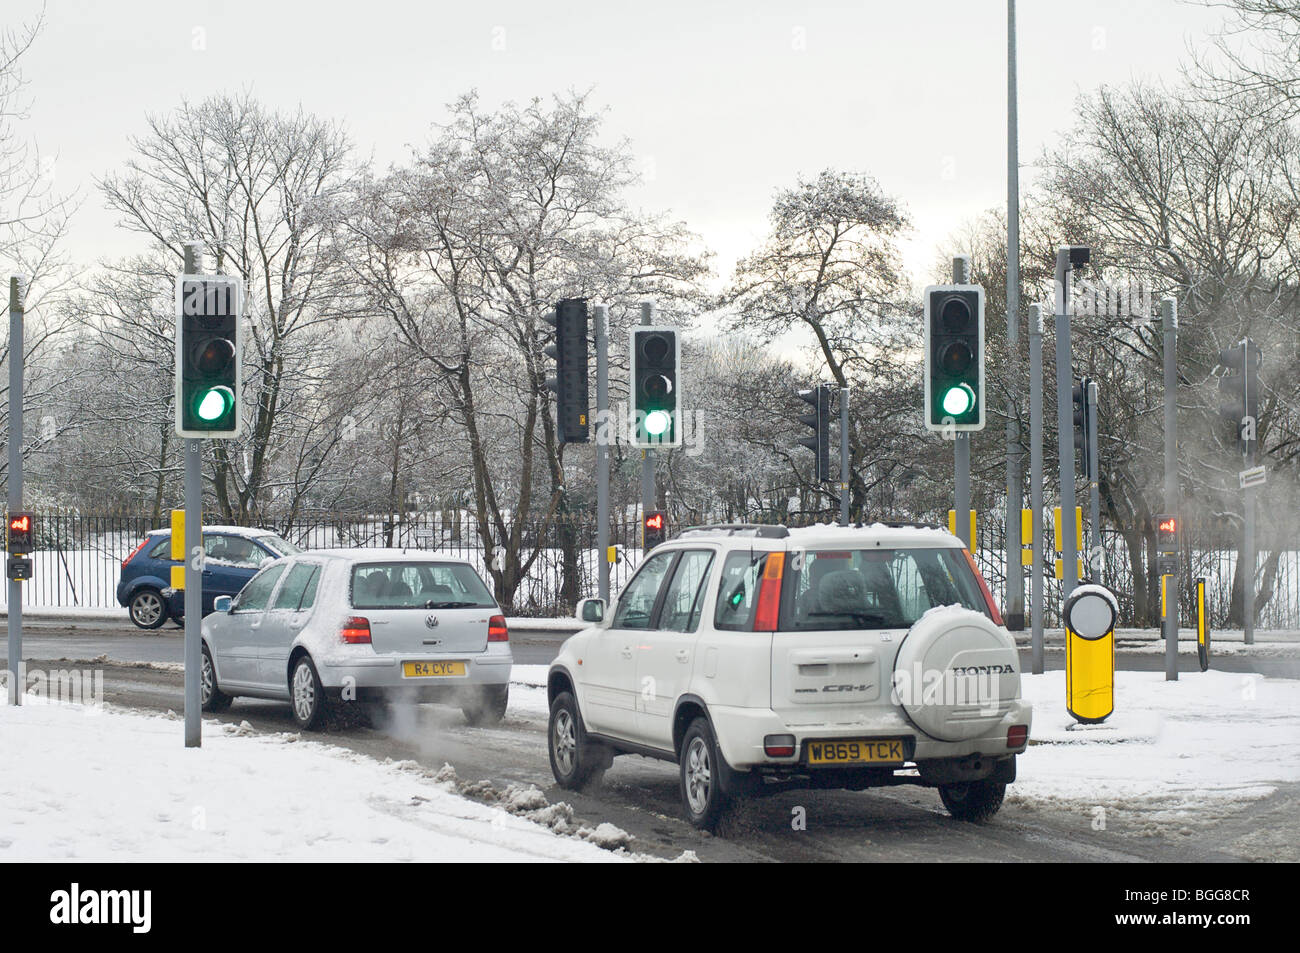 Traffic signals in the snow Stock Photo